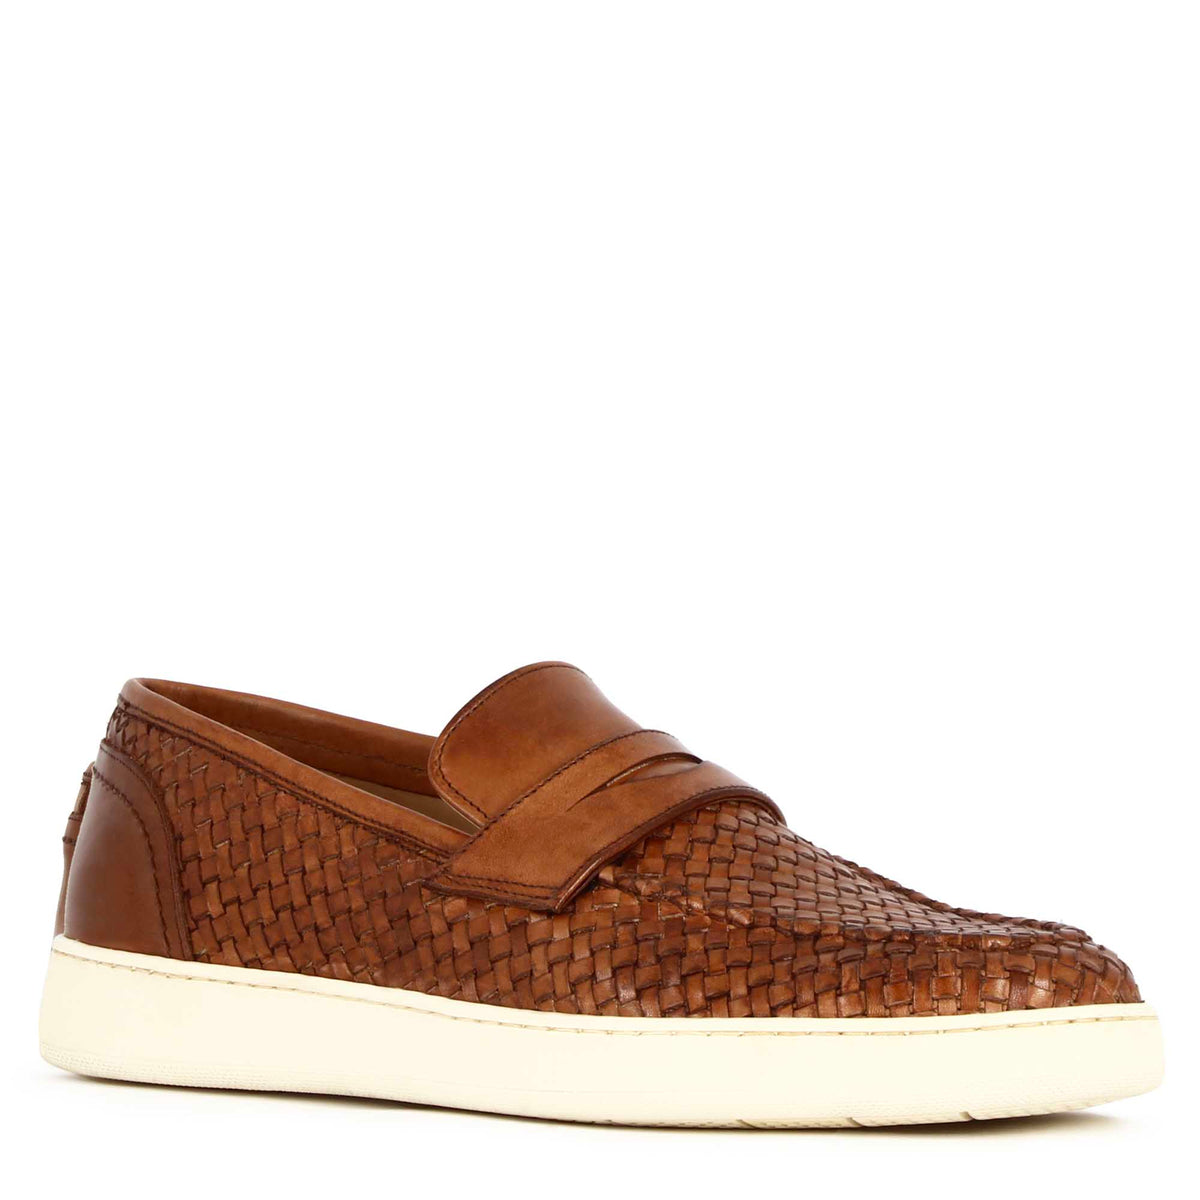 Handmade men's sneaker made of woven leather brown color